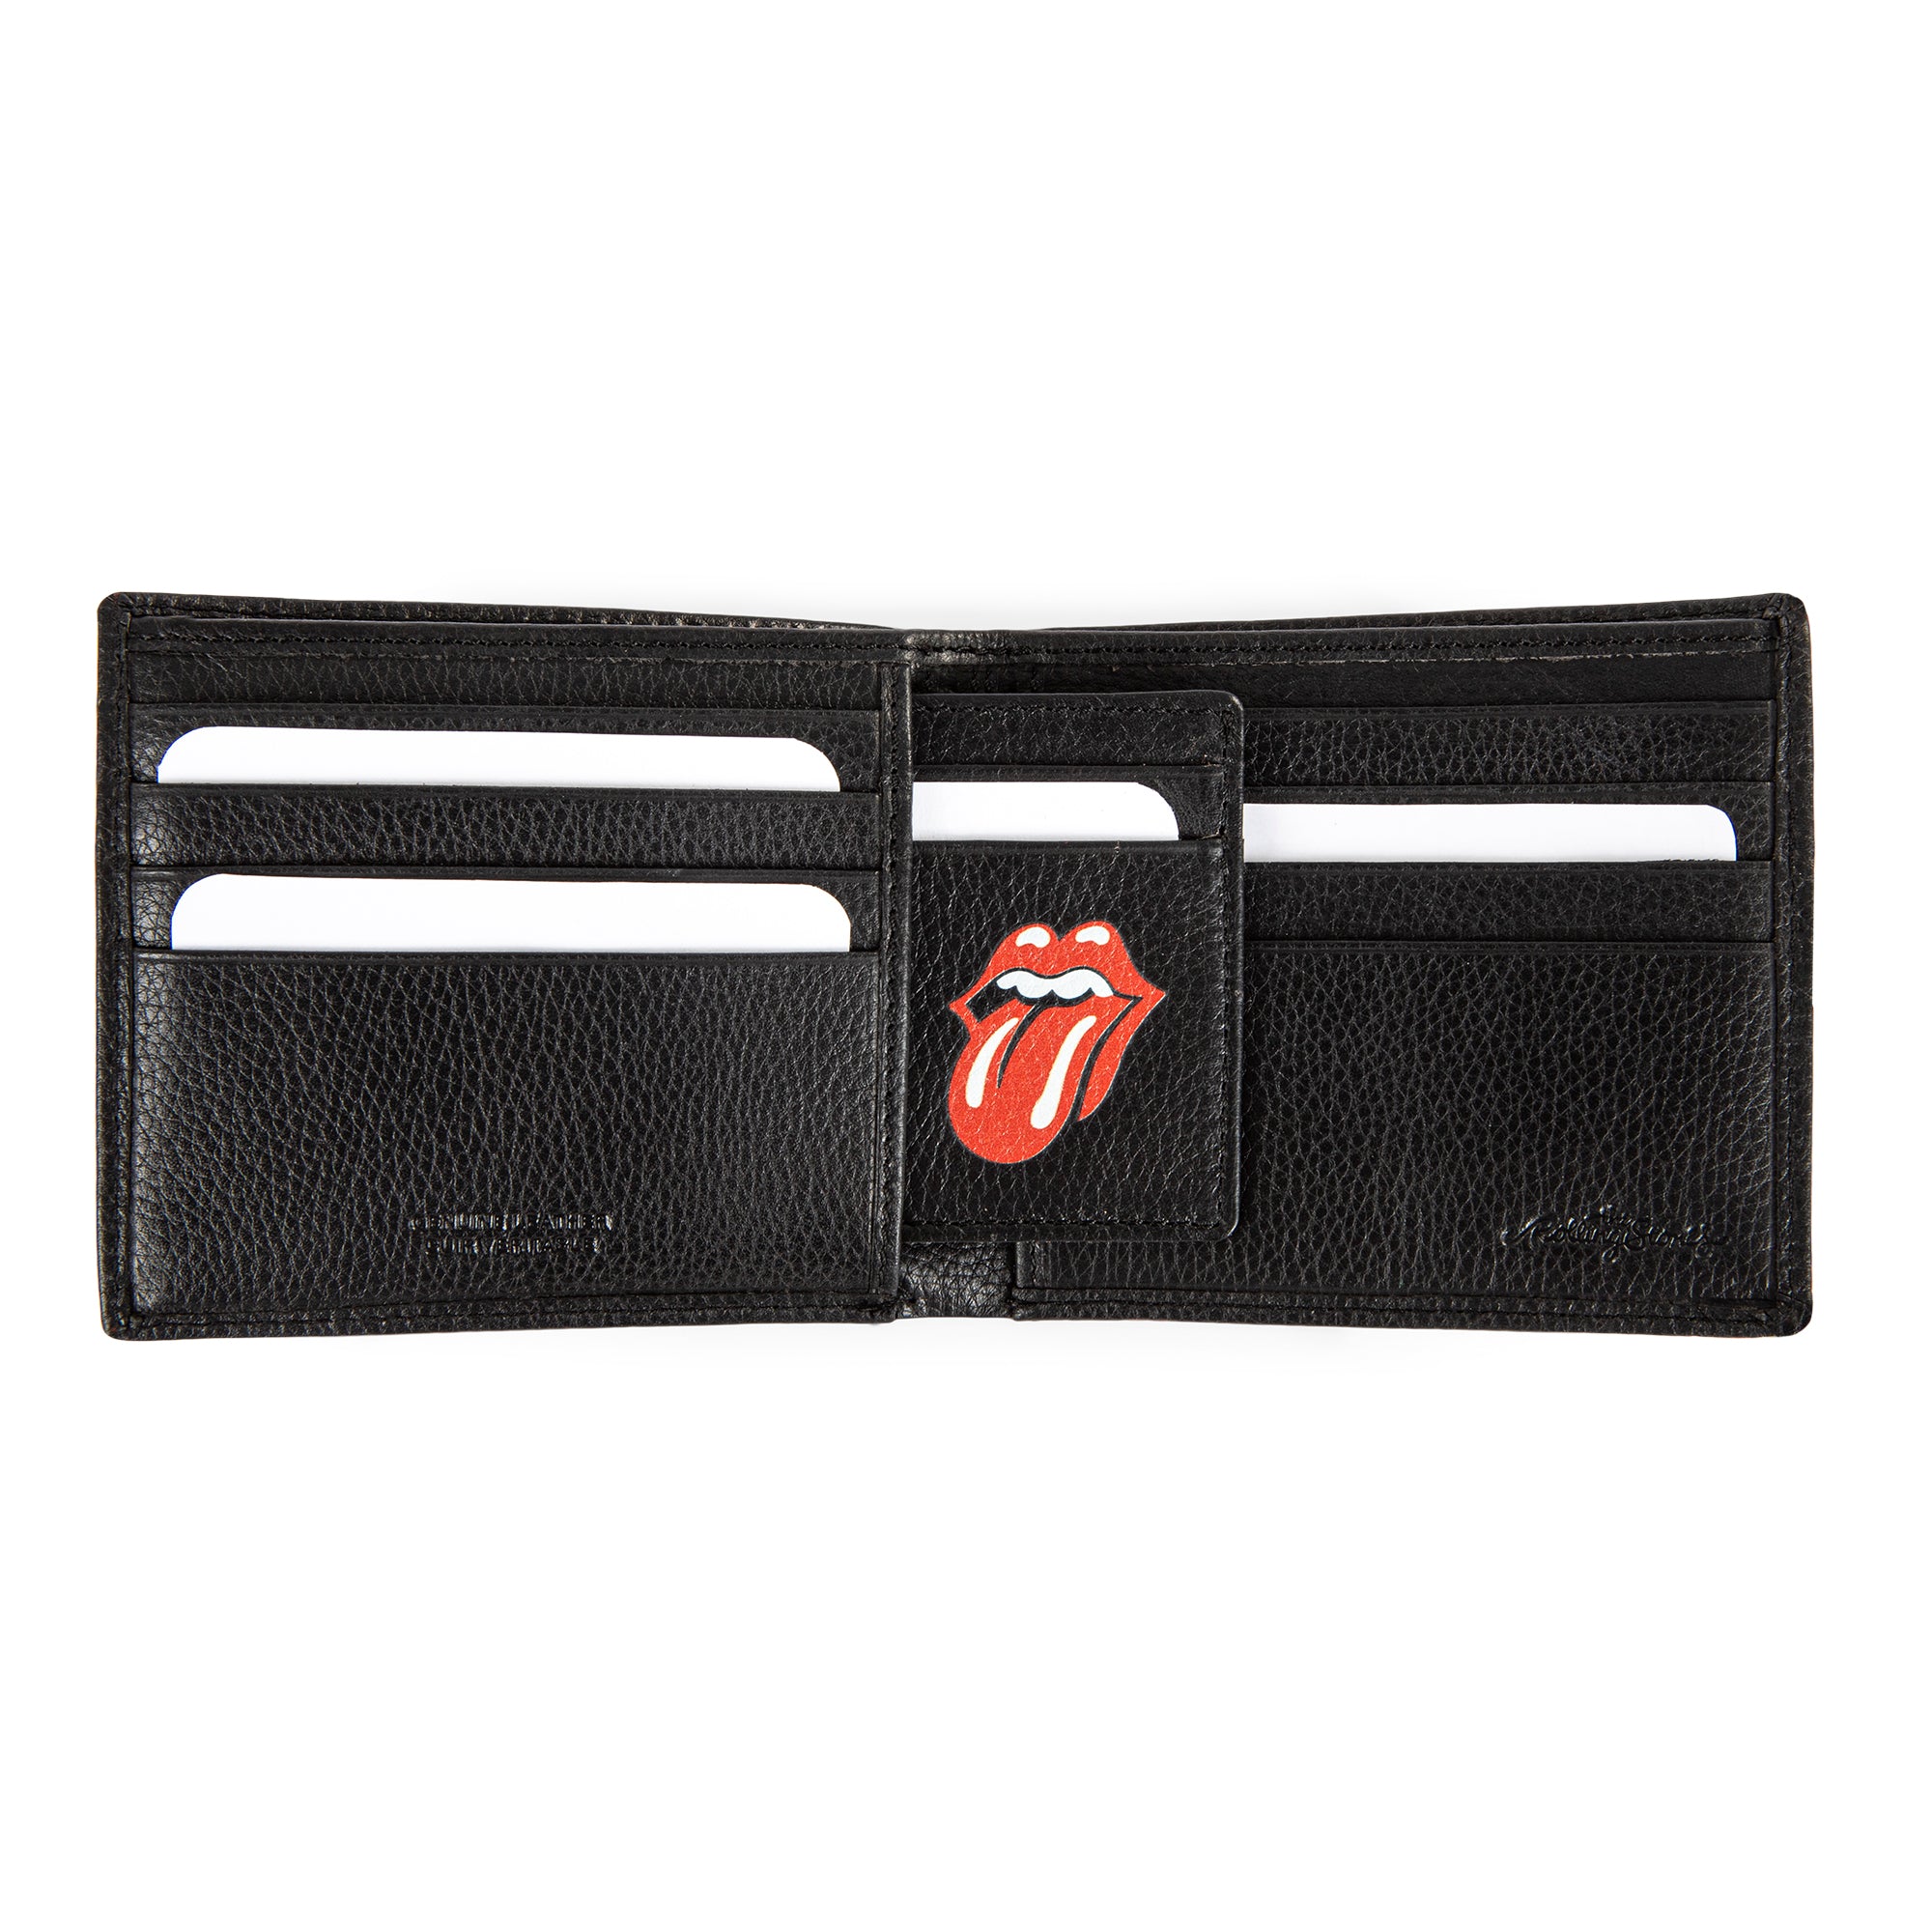 The Rolling Stones - The Watts Men's Leather Wallet